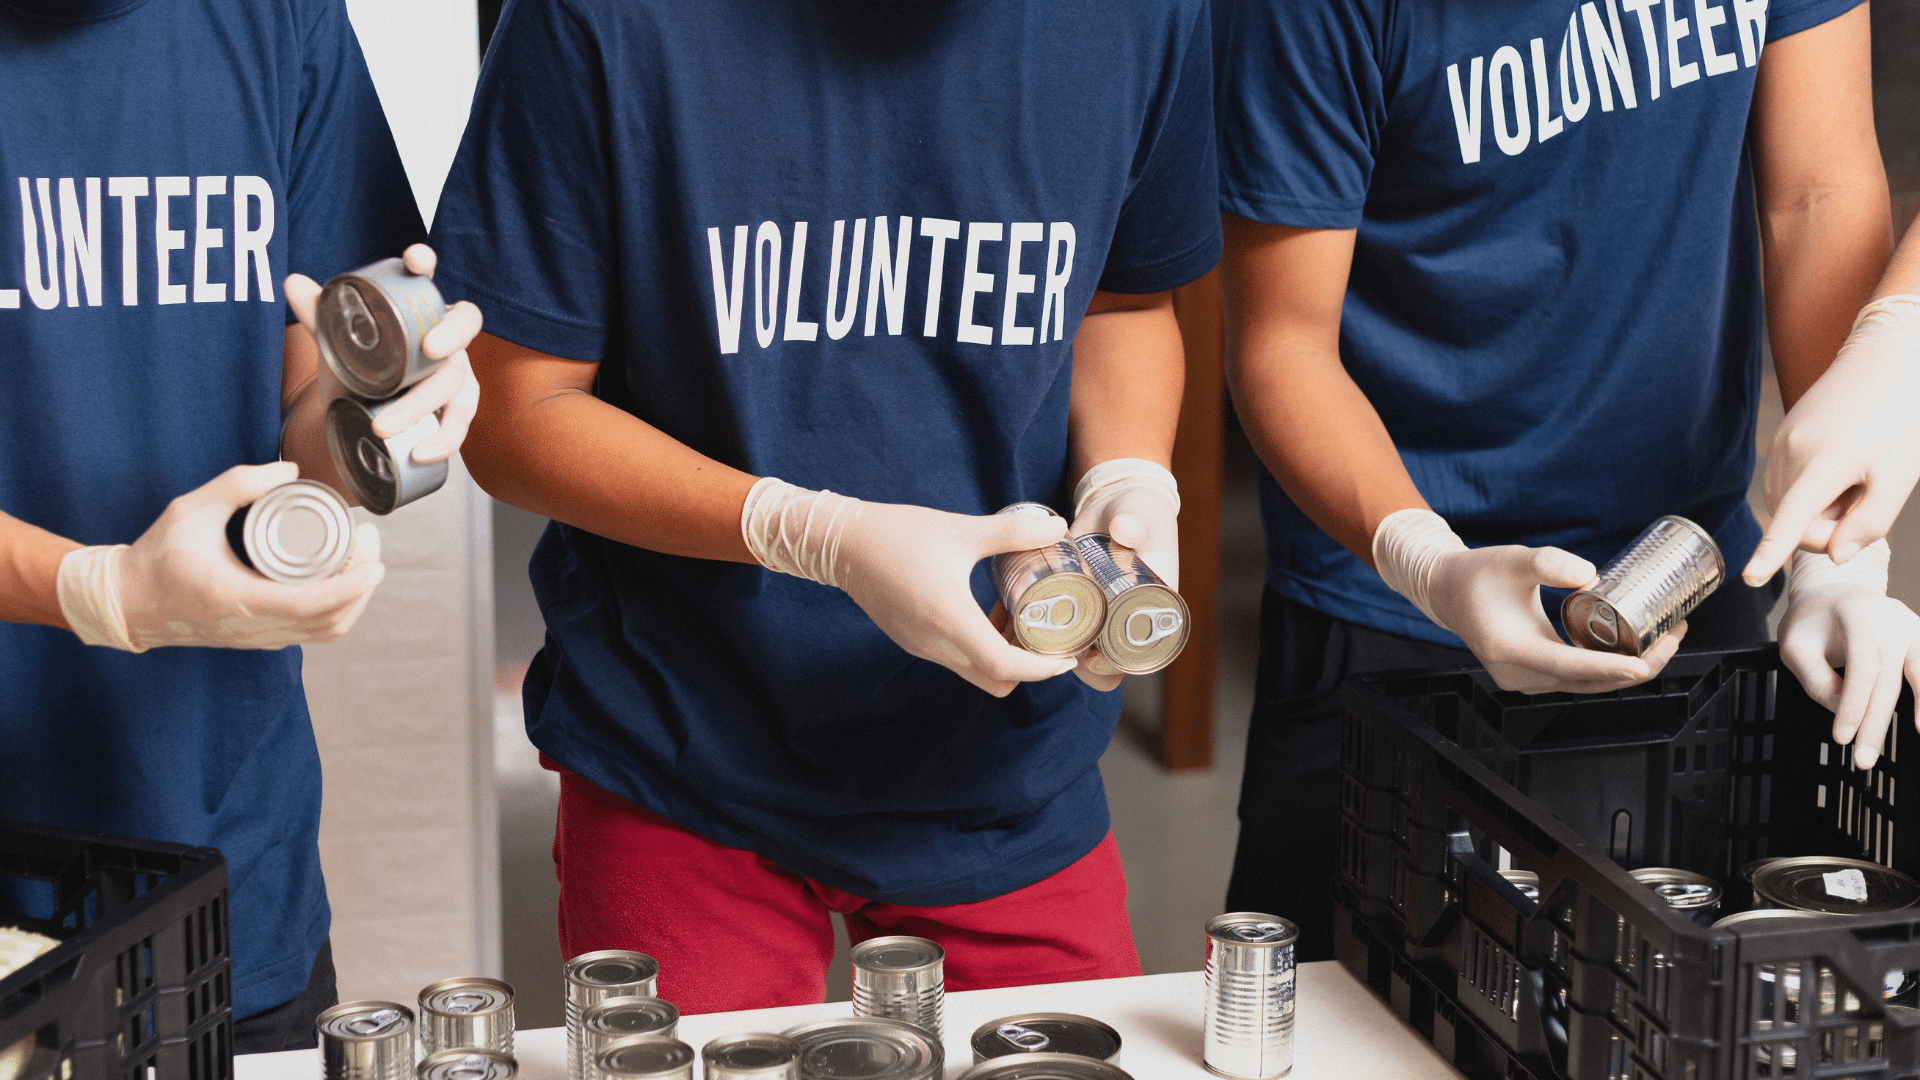 An image of three volunteers working at a local Oakville Not-for-profit organization